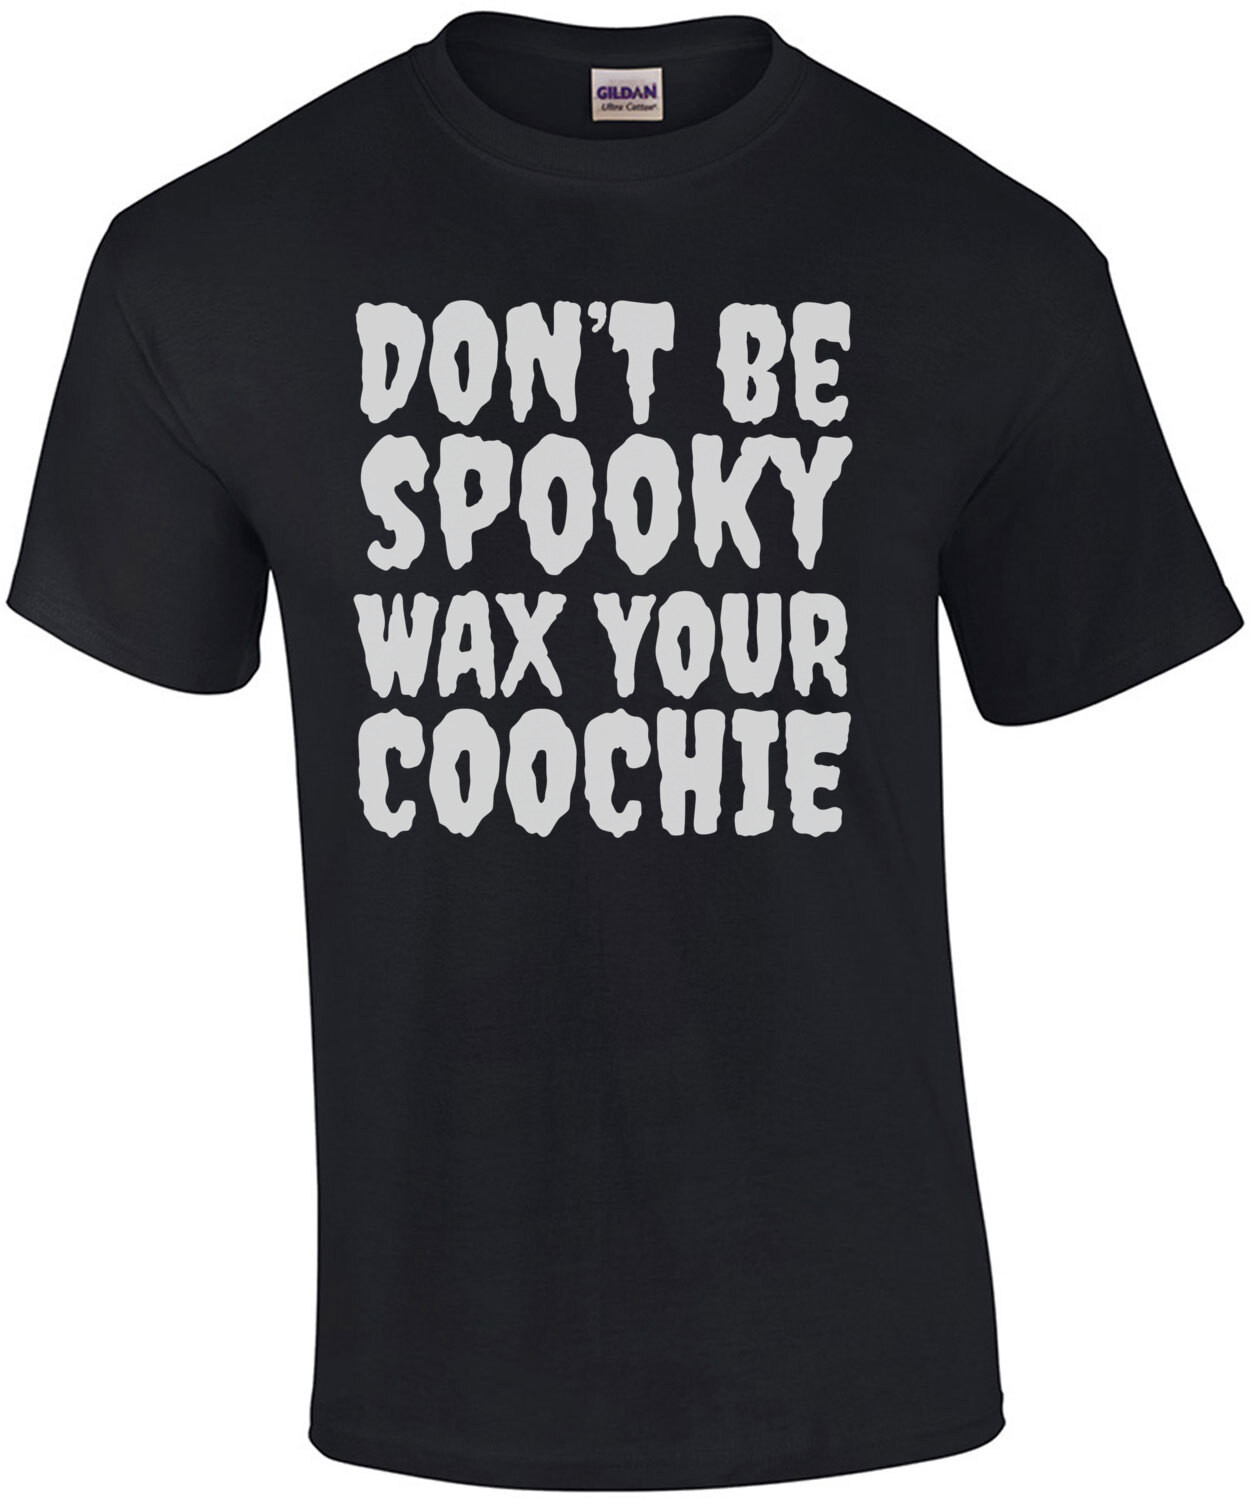 Don't be spooky wax your coochie - funny sexual offensive halloween t-shirt